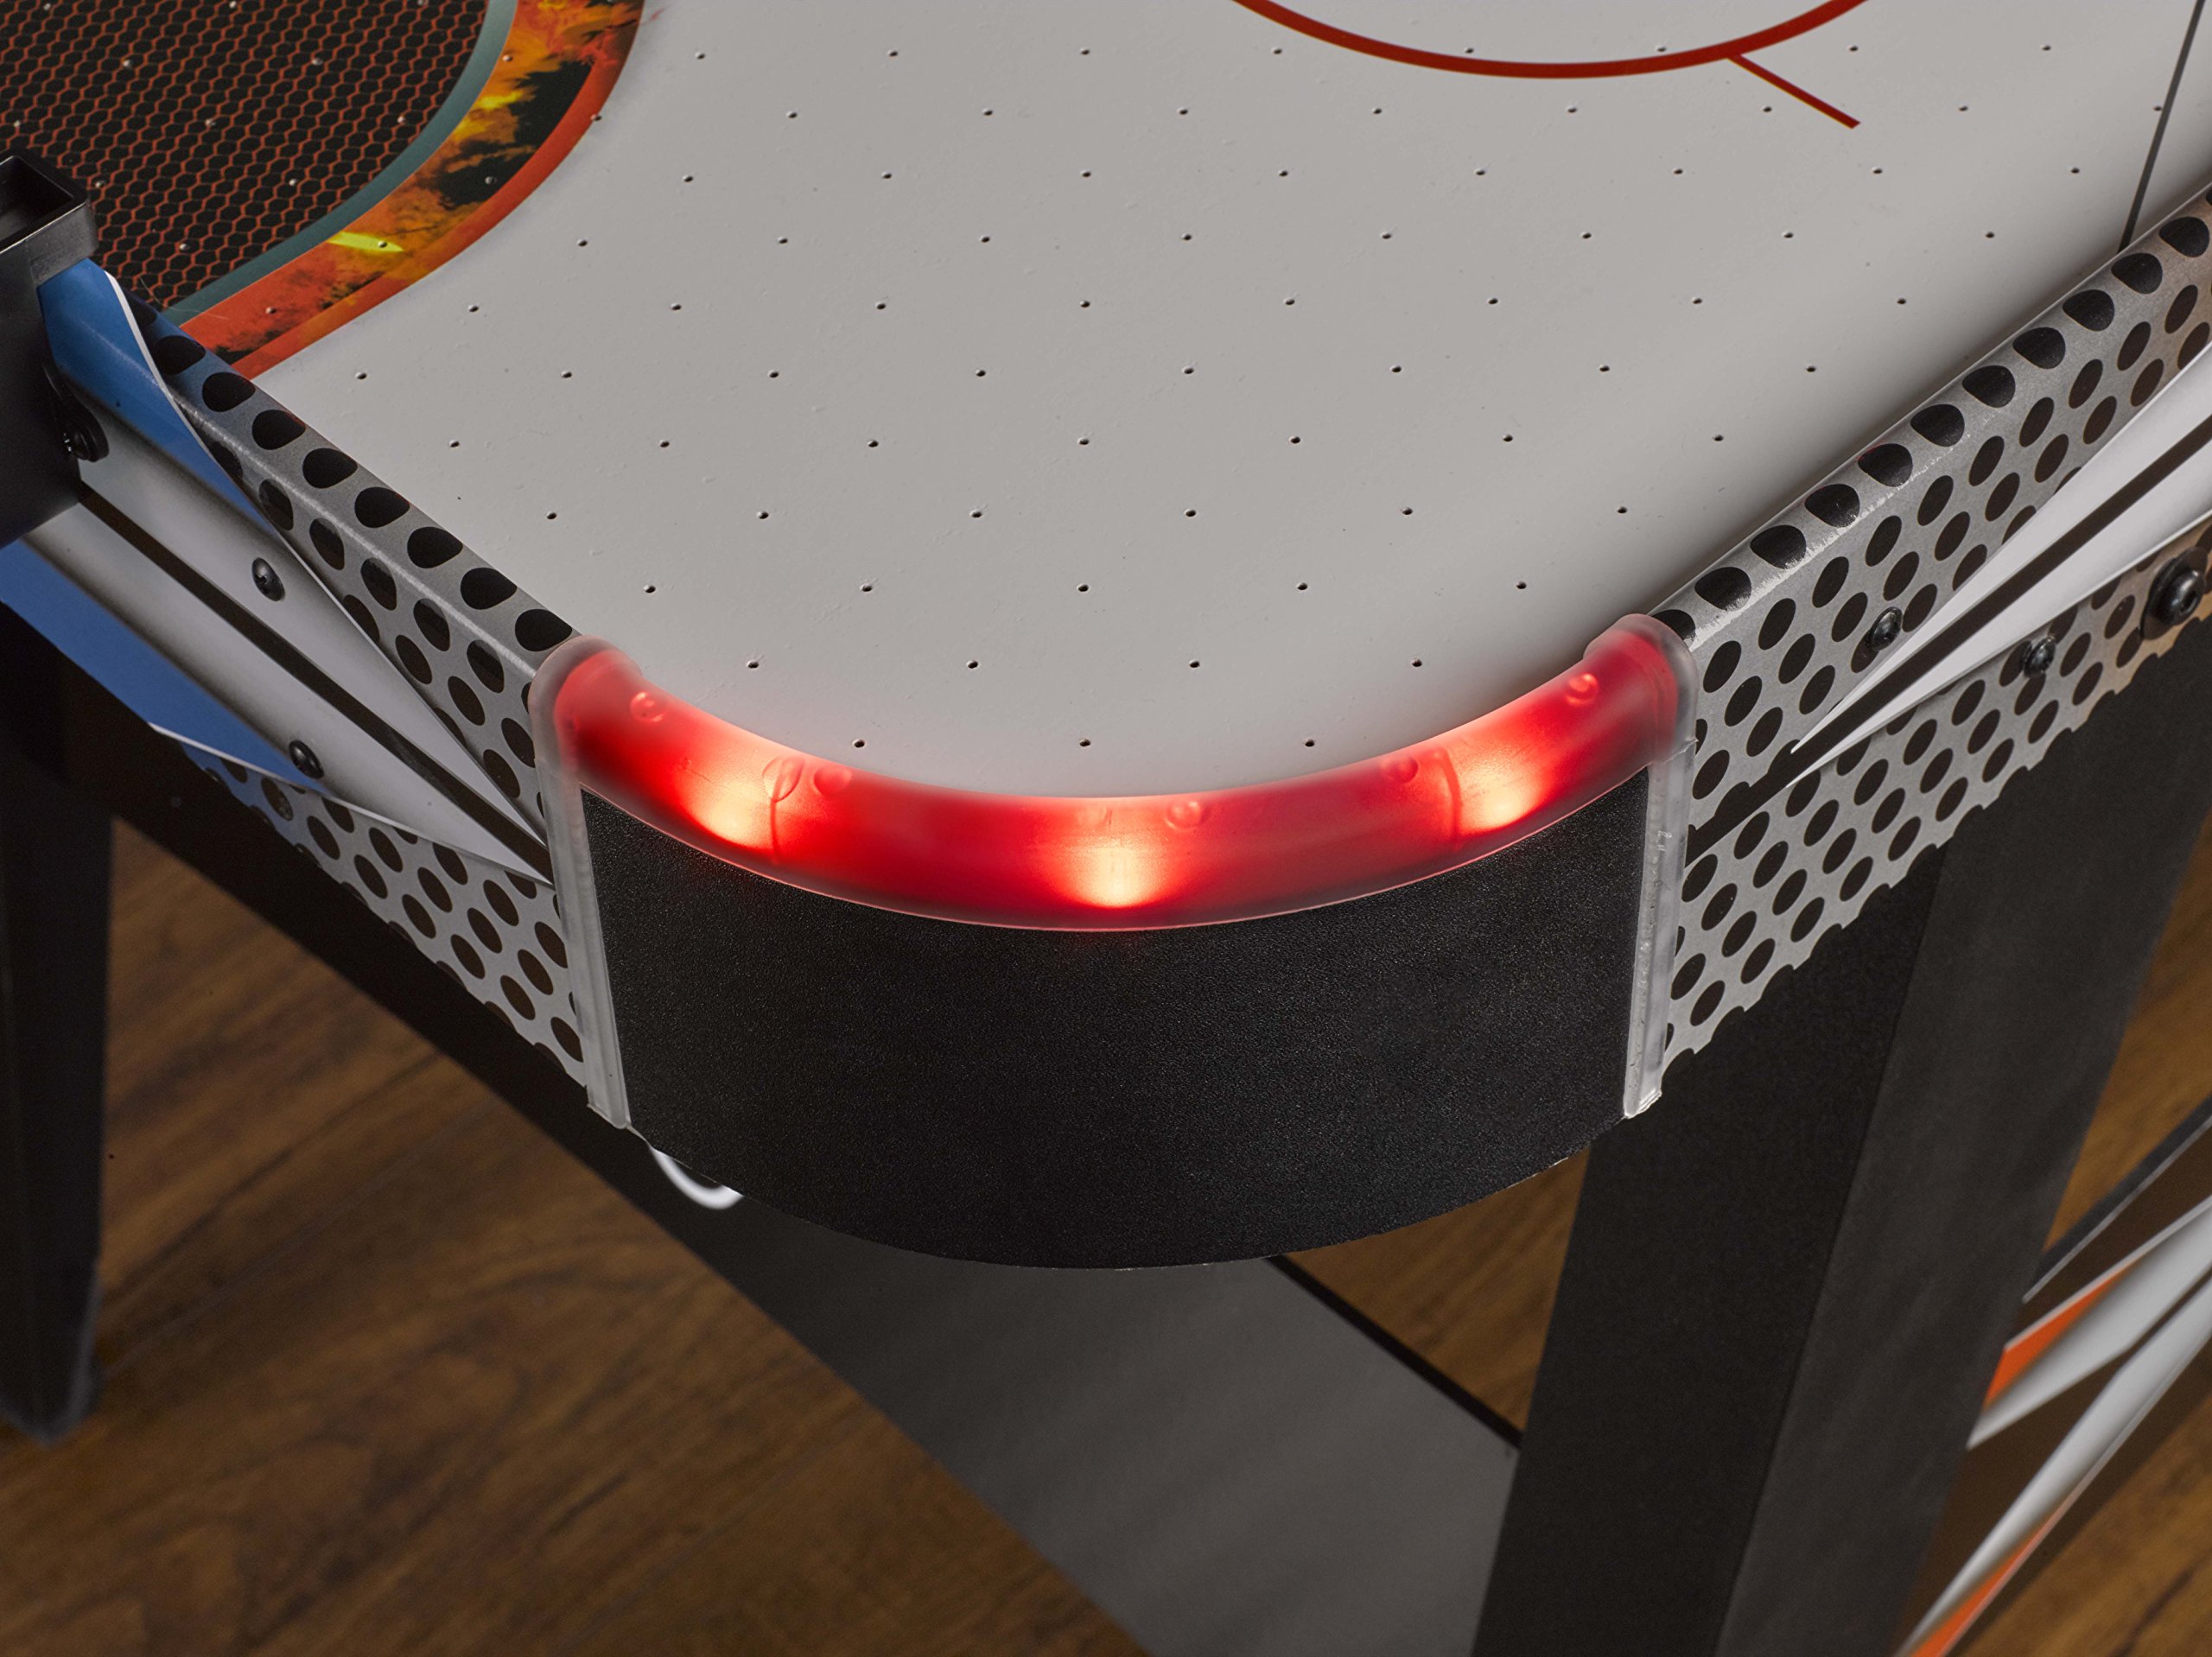 Triumph Fire ‘n Ice LED Light-Up 54” Air Hockey Table Includes 2 LED Hockey Pushers and LED Puck